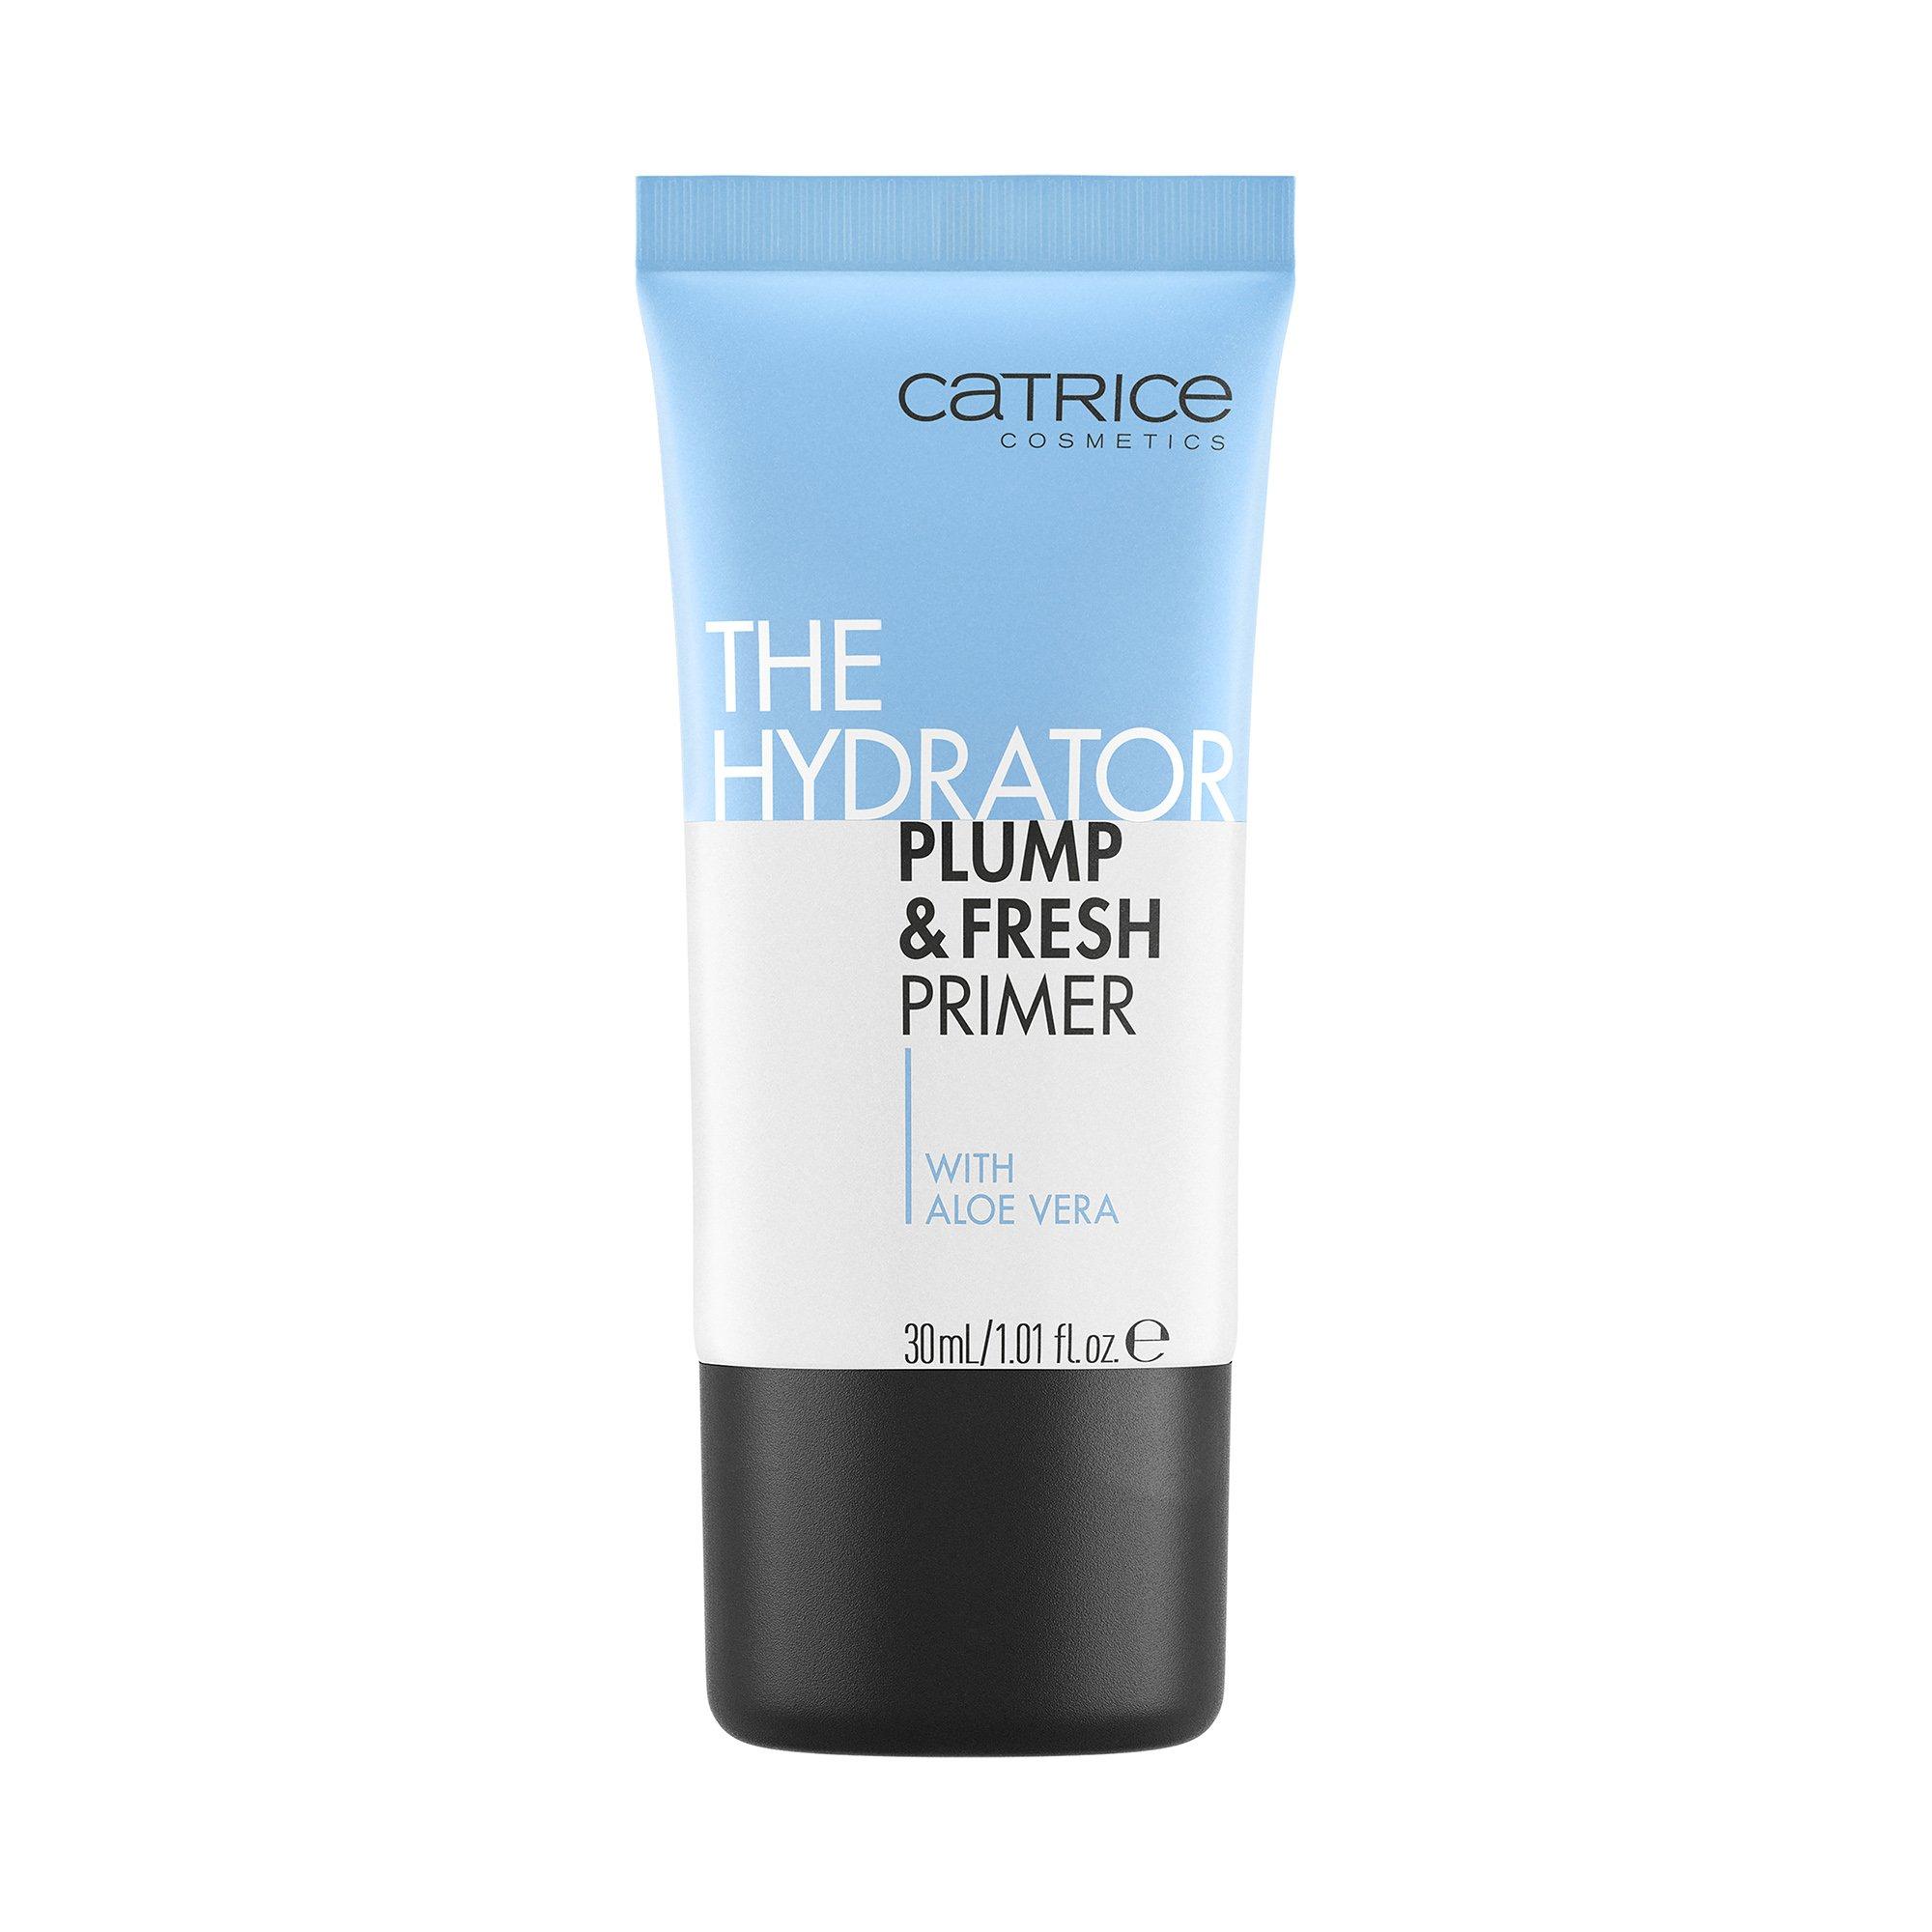 CATRICE The Hydrator Plump & Fresh Primer The Hydrator Plump & Fresh Primer 